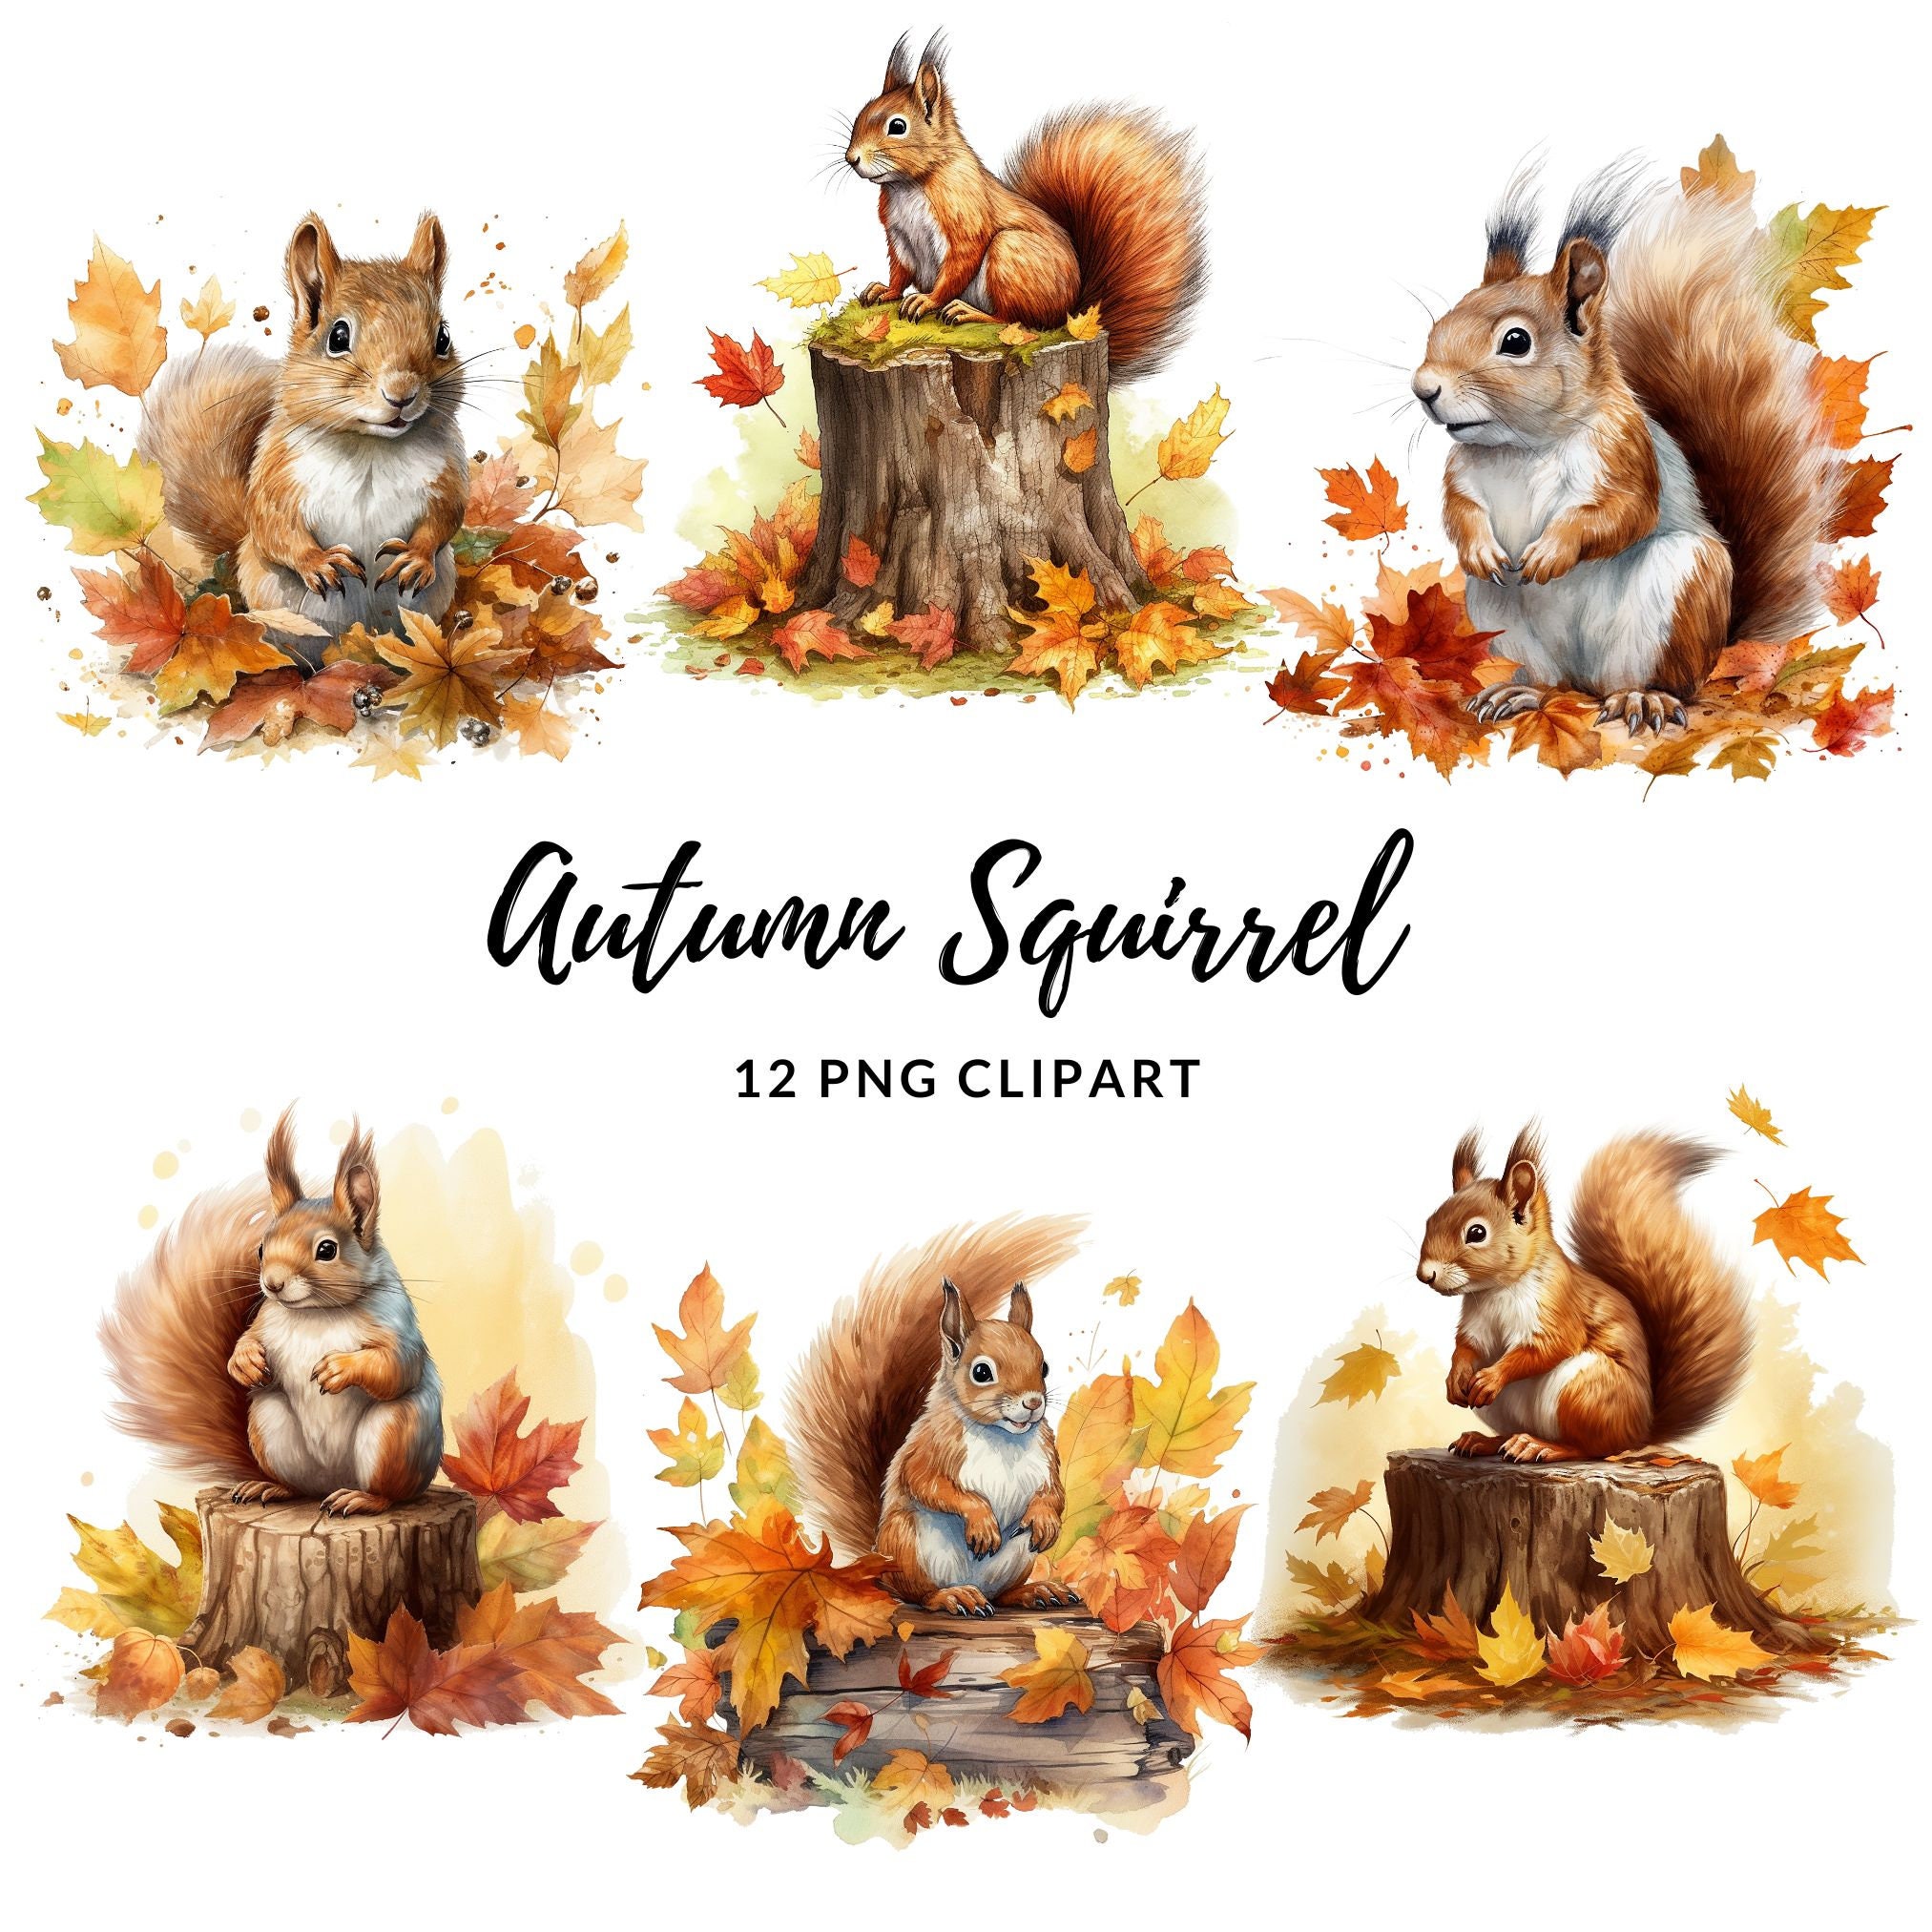 Autumn Squirrel Clipart 12 High Quality Pngs Digital - Etsy